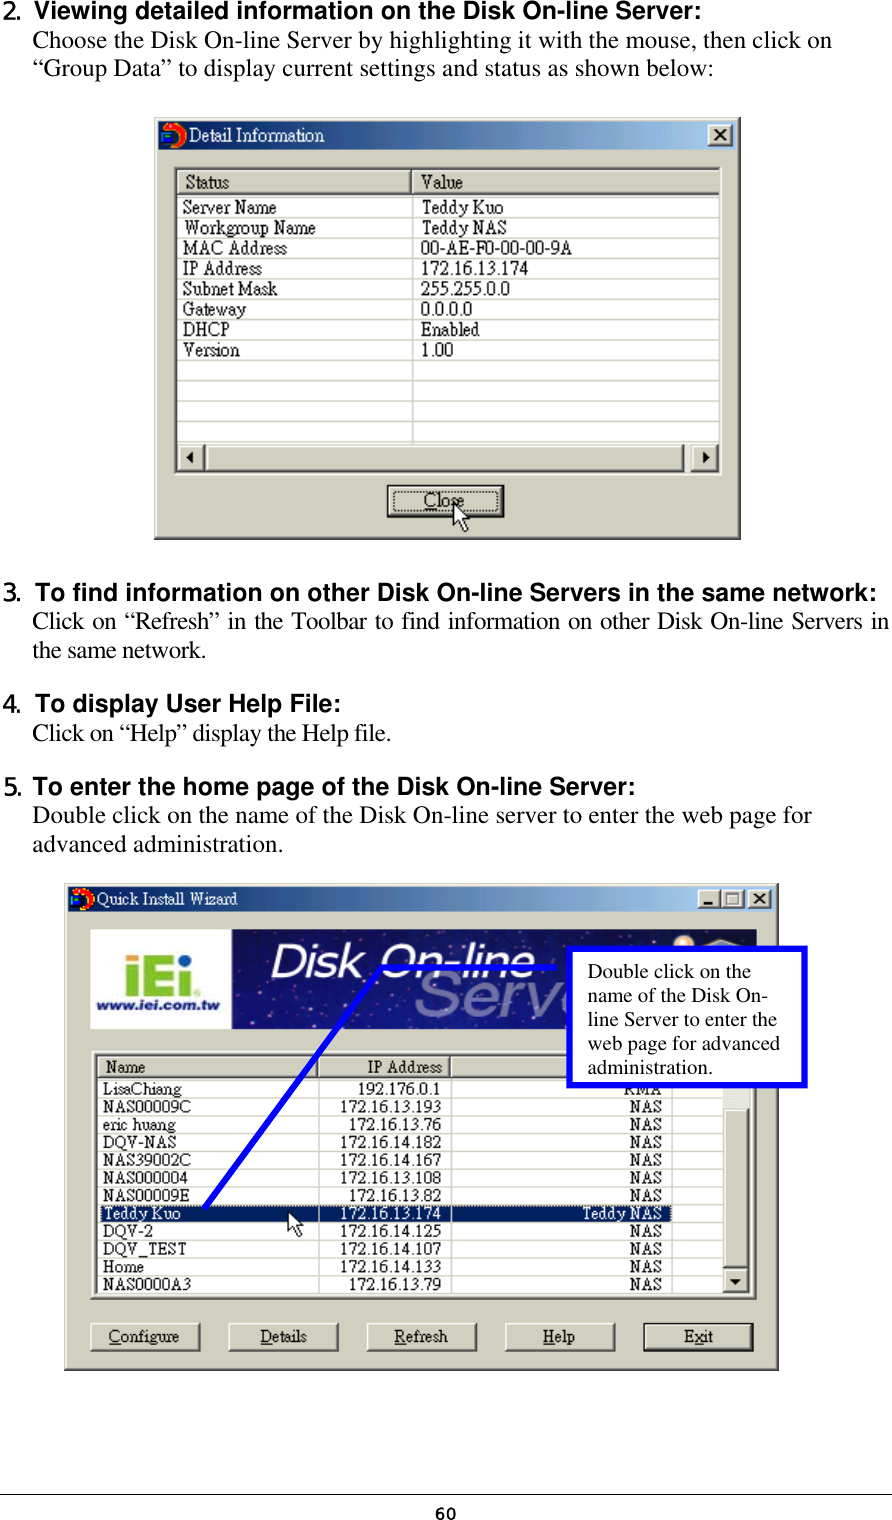   602. Viewing detailed information on the Disk On-line Server: Choose the Disk On-line Server by highlighting it with the mouse, then click on “Group Data” to display current settings and status as shown below:             3. To find information on other Disk On-line Servers in the same network:  Click on “Refresh” in the Toolbar to find information on other Disk On-line Servers in the same network. 4. To display User Help File: Click on “Help” display the Help file. 5. To enter the home page of the Disk On-line Server: Double click on the name of the Disk On-line server to enter the web page for advanced administration.                   Double click on the name of the Disk On-line Server to enter the web page for advanced administration.  